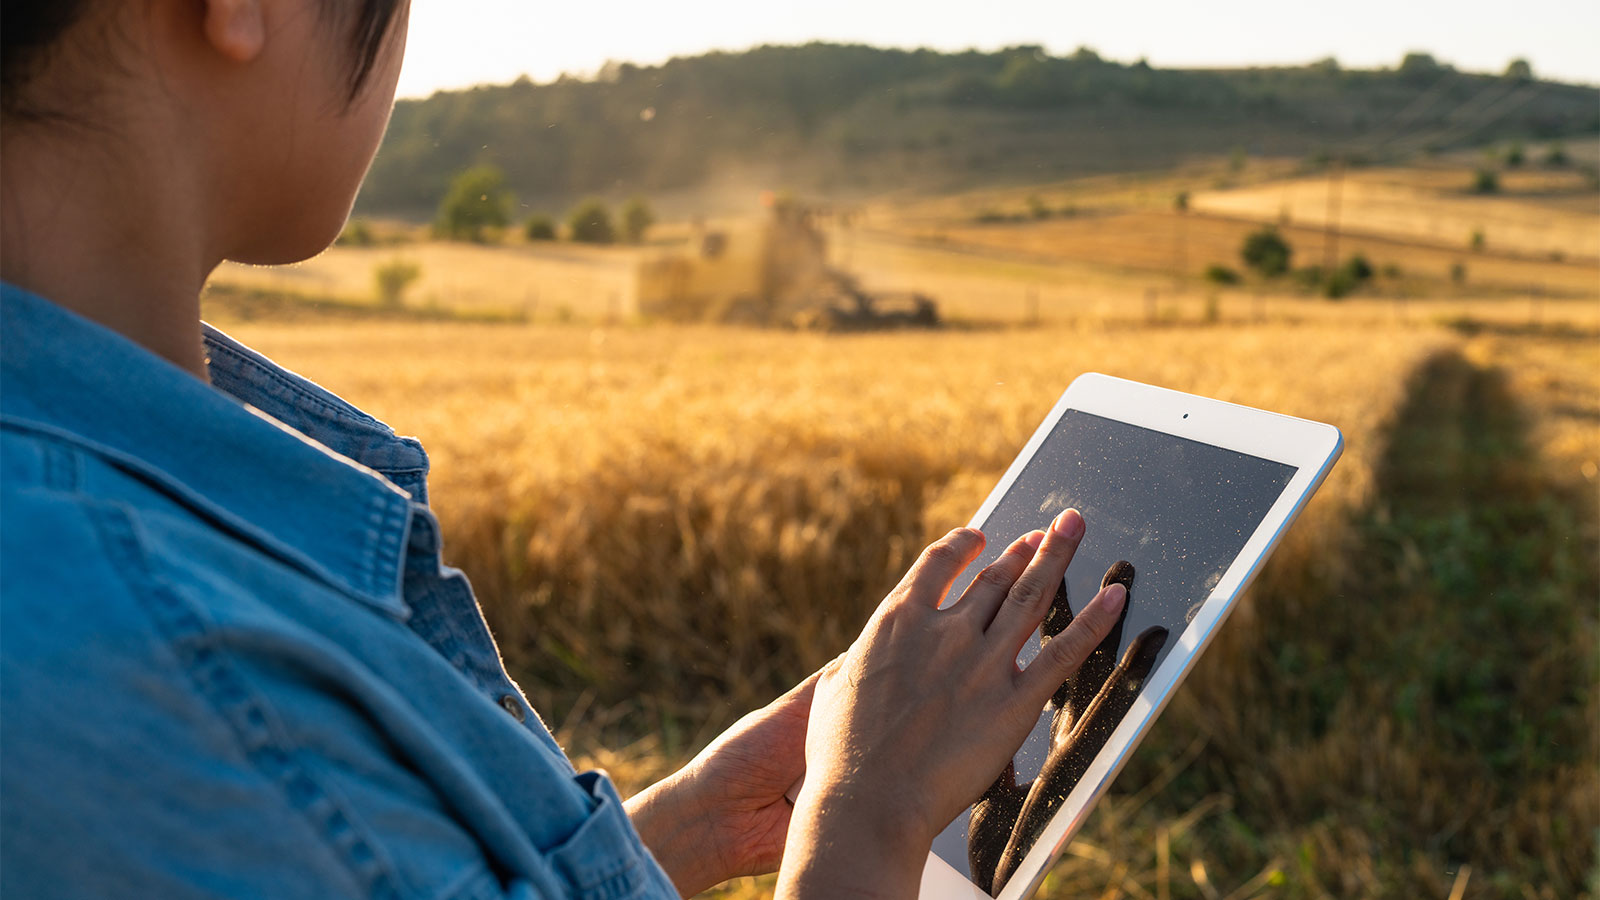 Over the shoulder view of woman using tablet outside; in the background a combine harvester machine works in a field with hills in the distance.